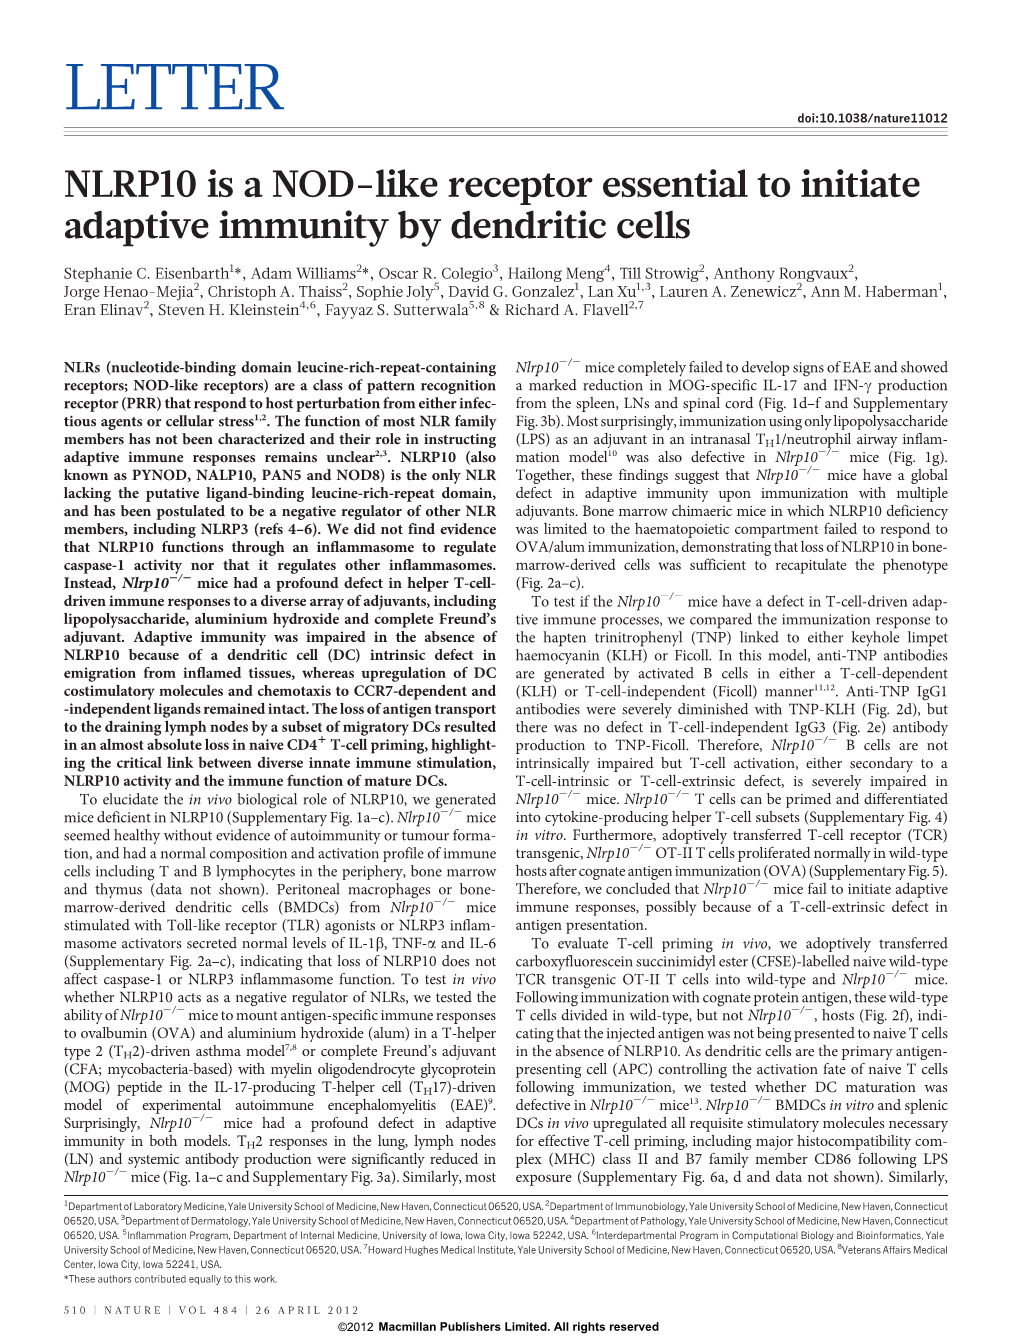 NLRP10 Is a NOD-Like Receptor Essential to Initiate Adaptive Immunity by Dendritic Cells